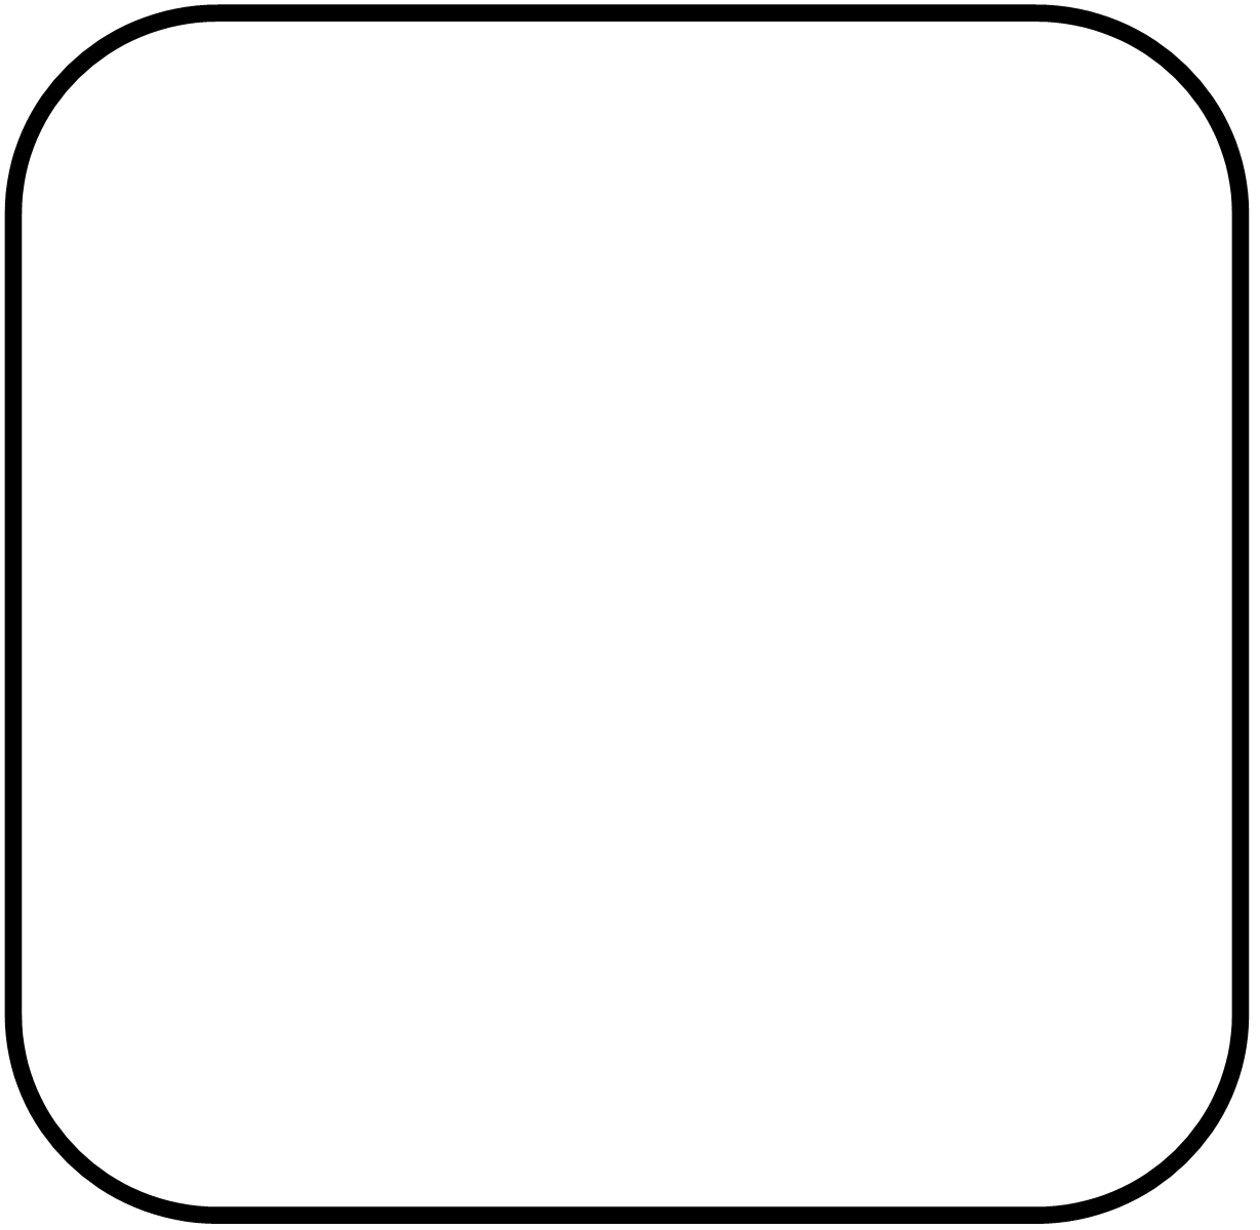 Free White Rounded Rectangle Png, Download Free Clip Art